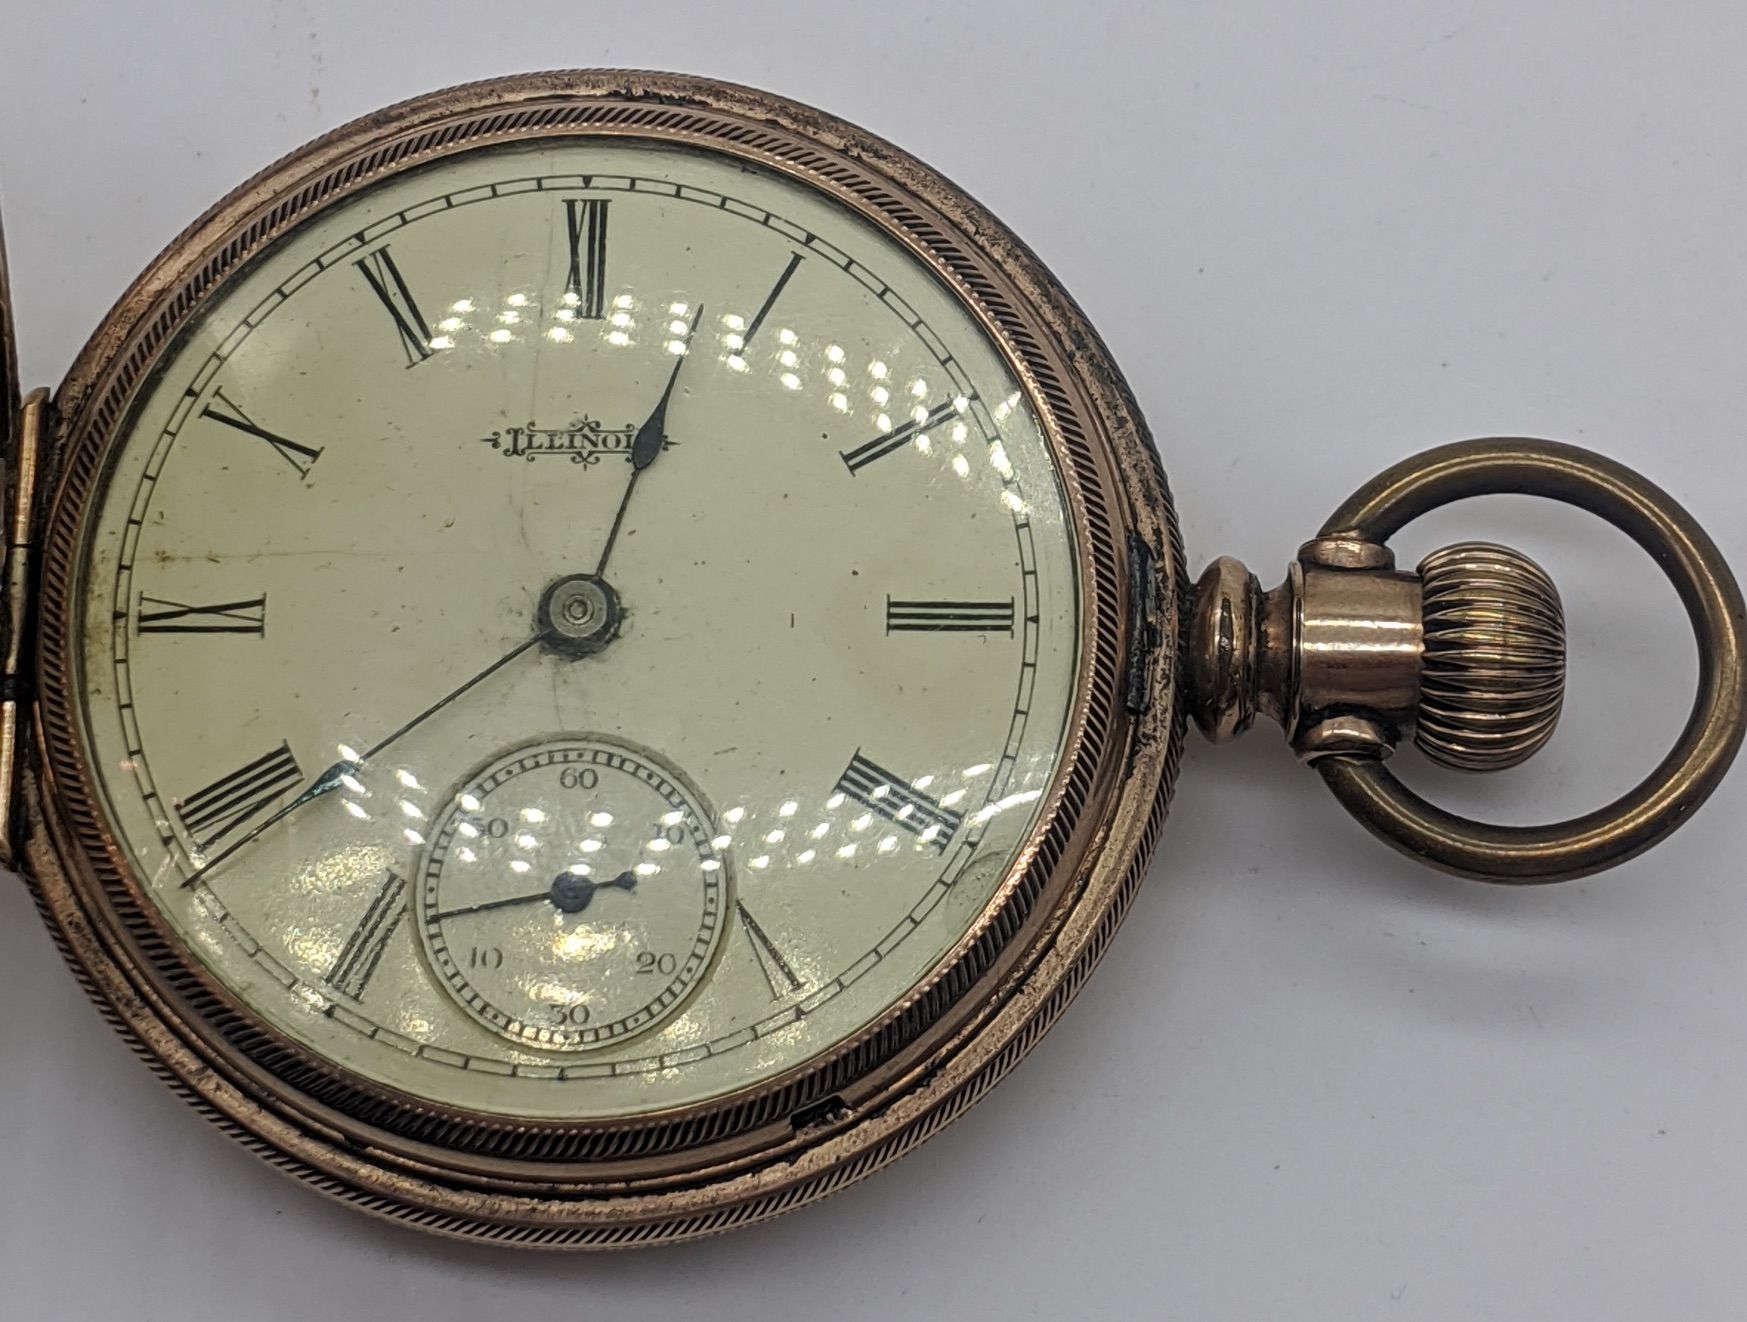 Illinois Watch Illinois Watch Company gold front and back pocket watch, Roman nu&hellip;